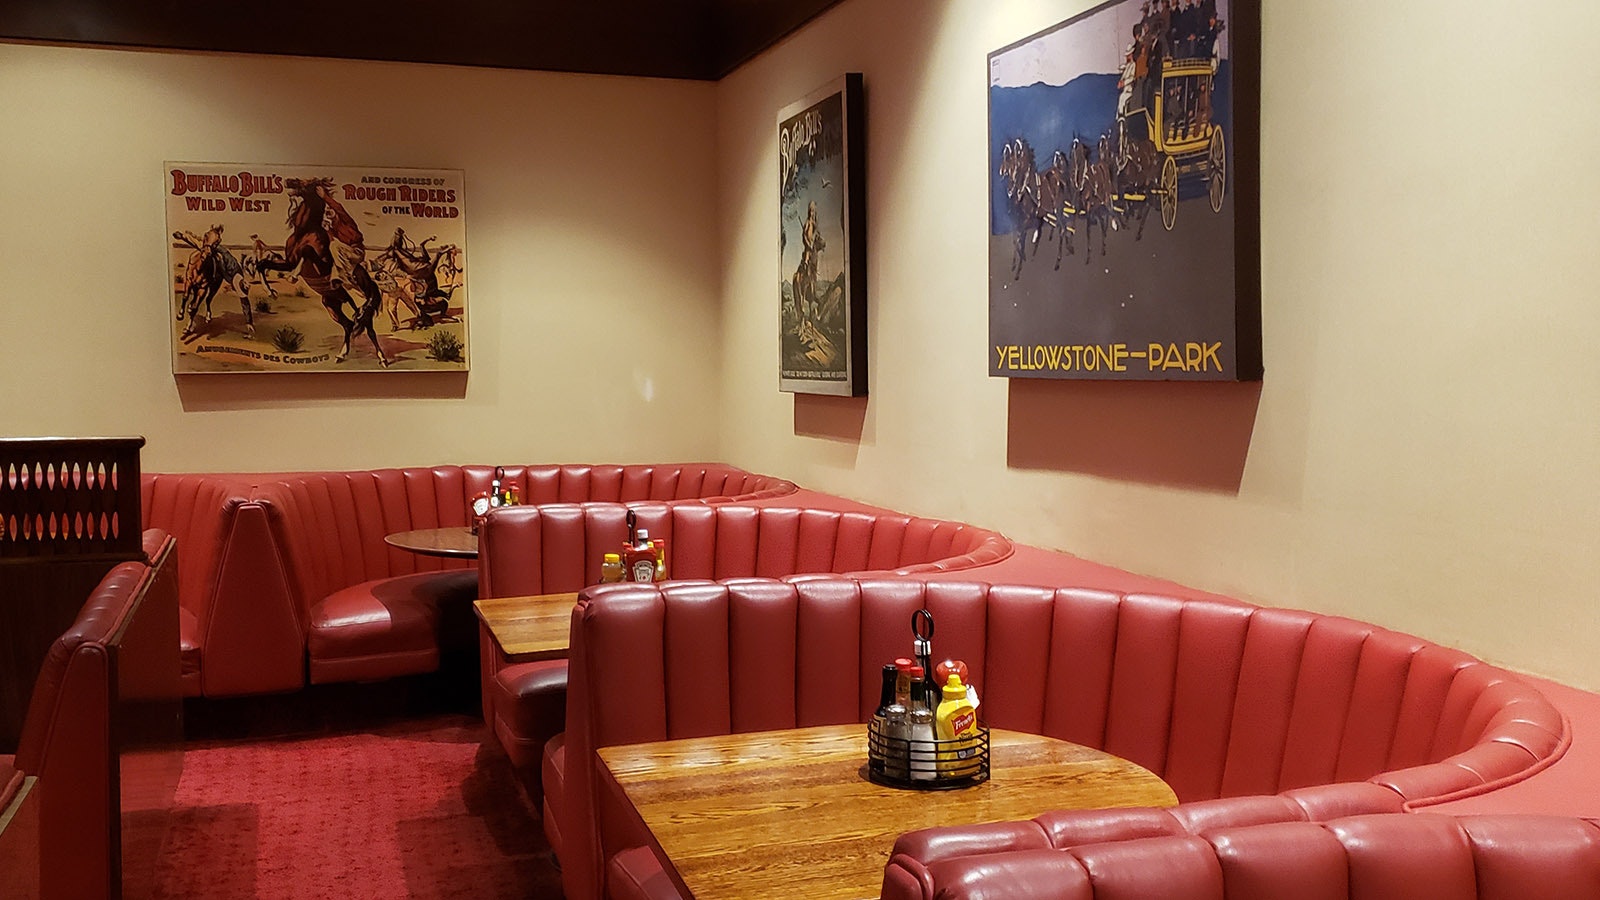 The seating dates back to the 1950s along with throwback billboards hanging on the walls.